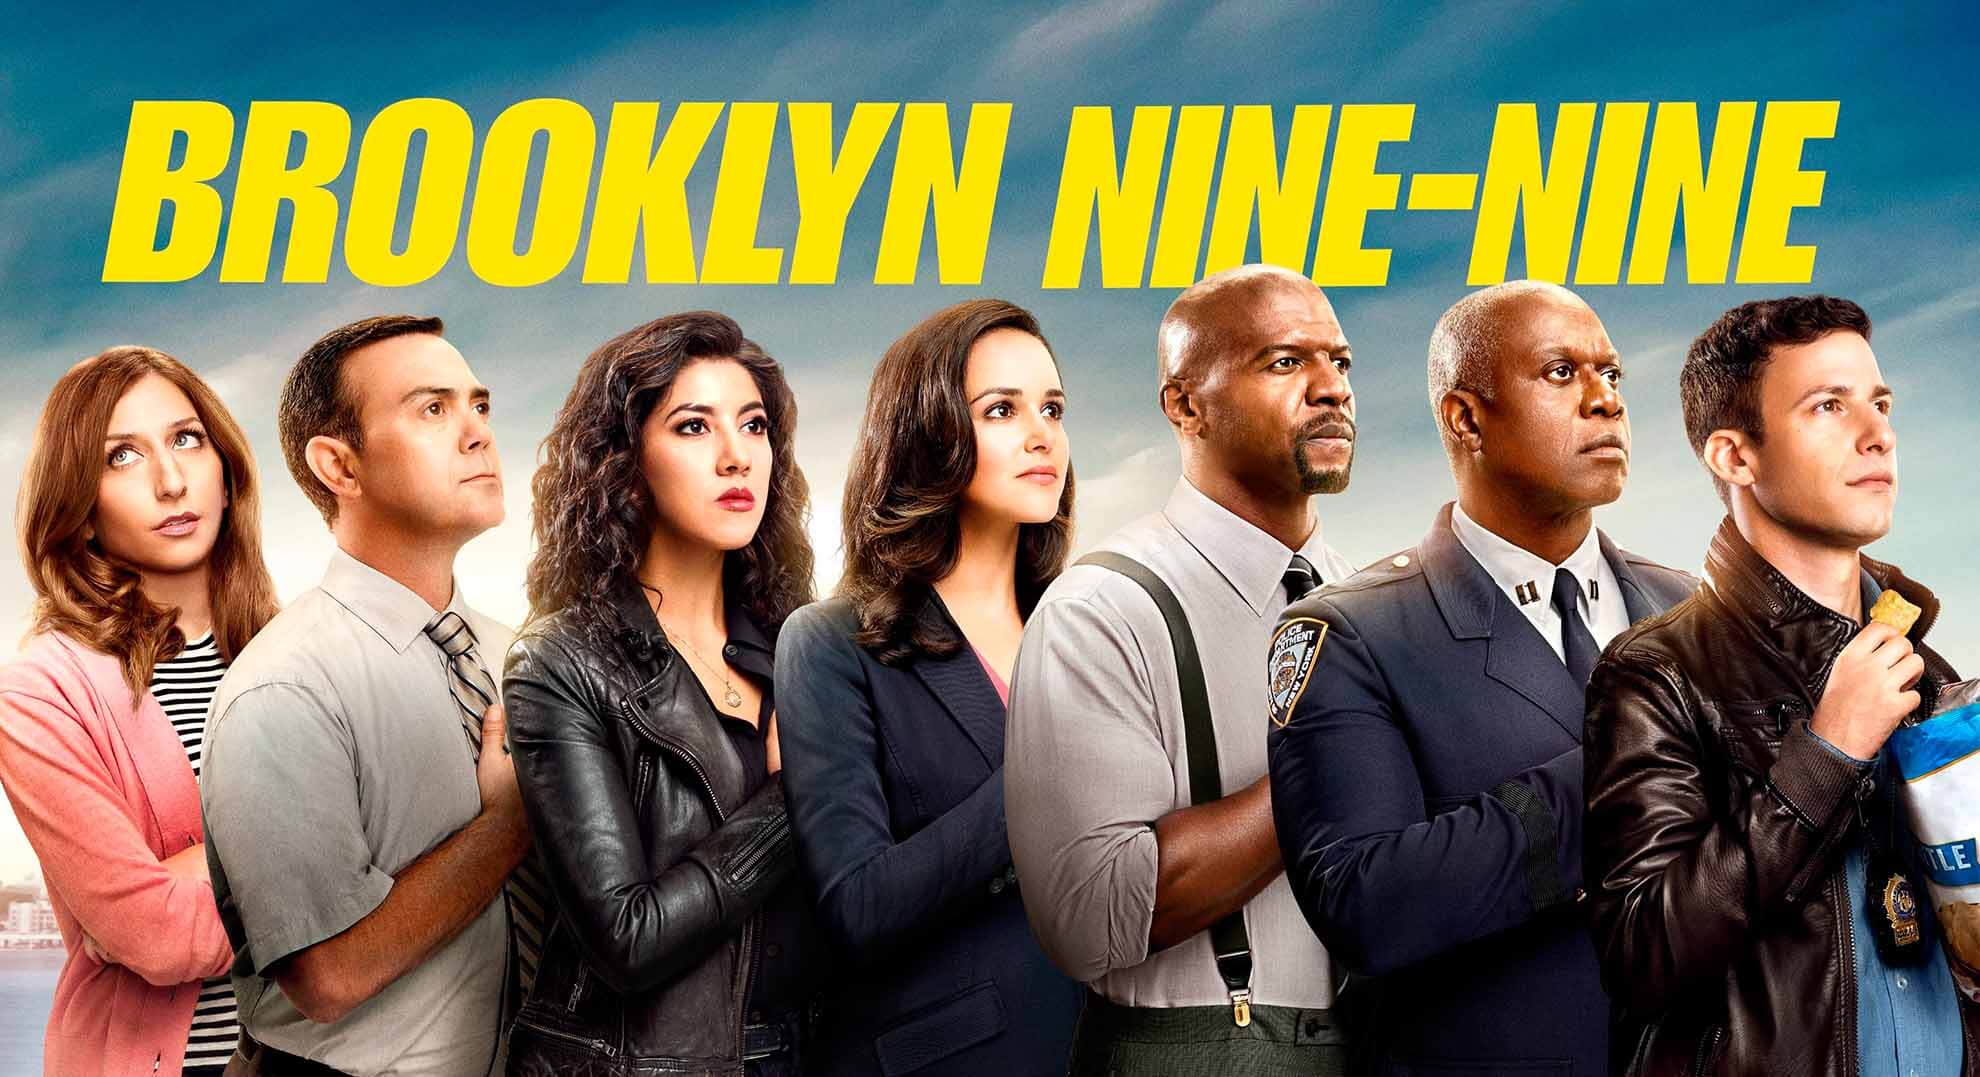 Brooklyn Nine-Nine: Meet The Cast Of Comical Cops From 